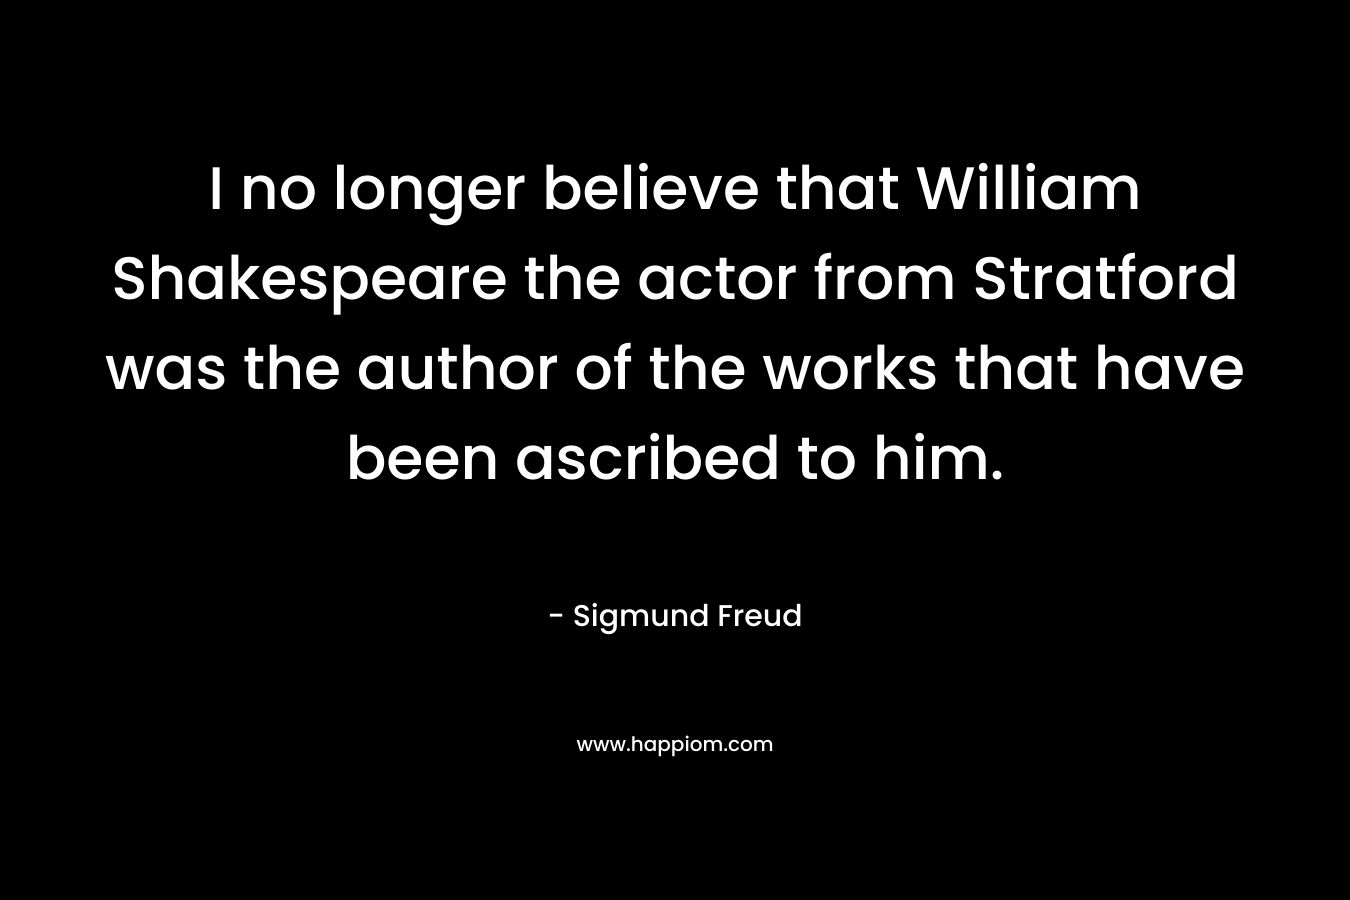 I no longer believe that William Shakespeare the actor from Stratford was the author of the works that have been ascribed to him.